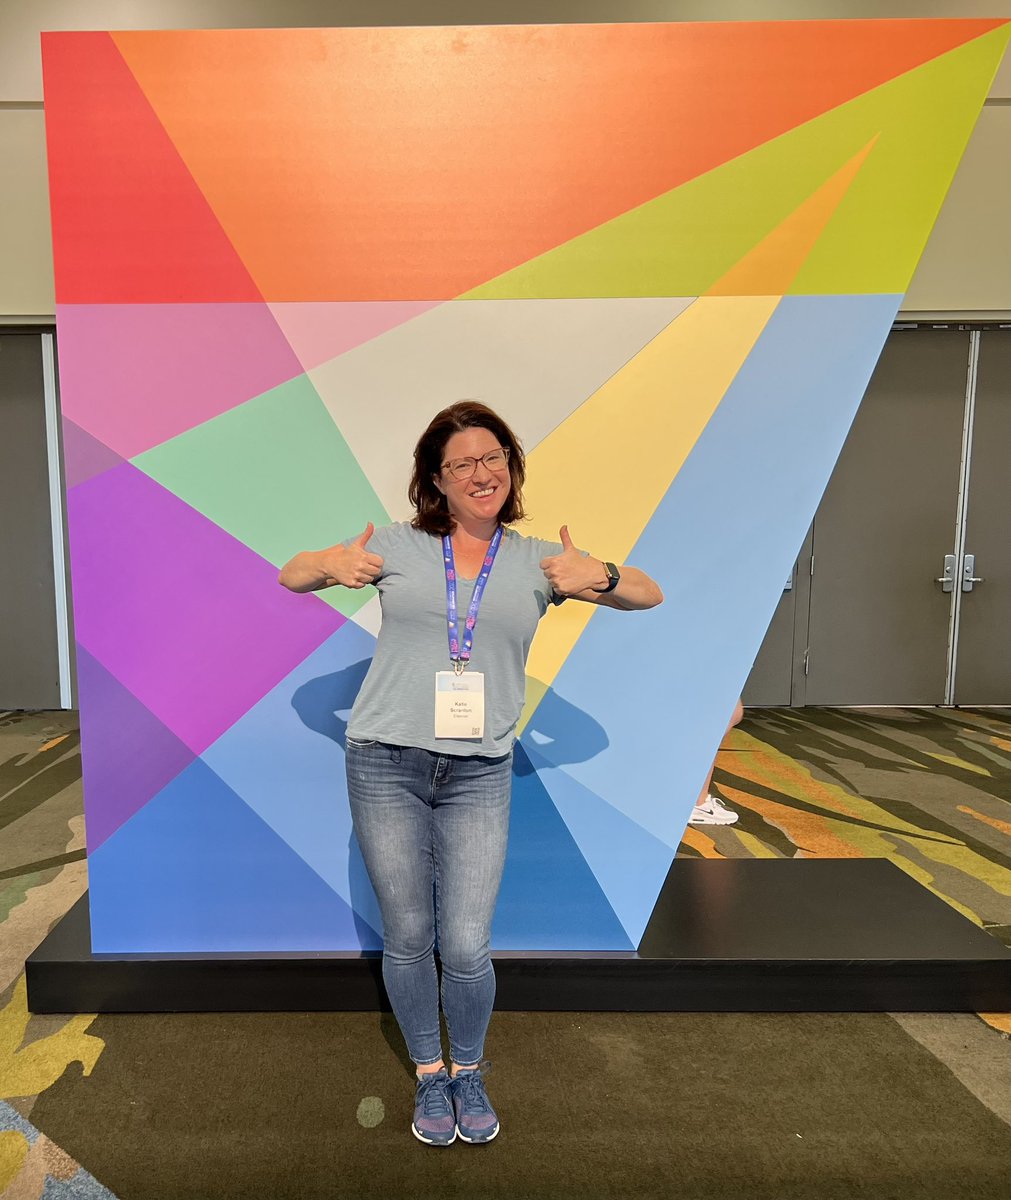 I’m at Grace Hopper #GHC22 taking selfies at every opportunity. Come connect with us @ElsevierConnect at booth 849! #womenintech #elsevier #elsevierlife #inclusivetech